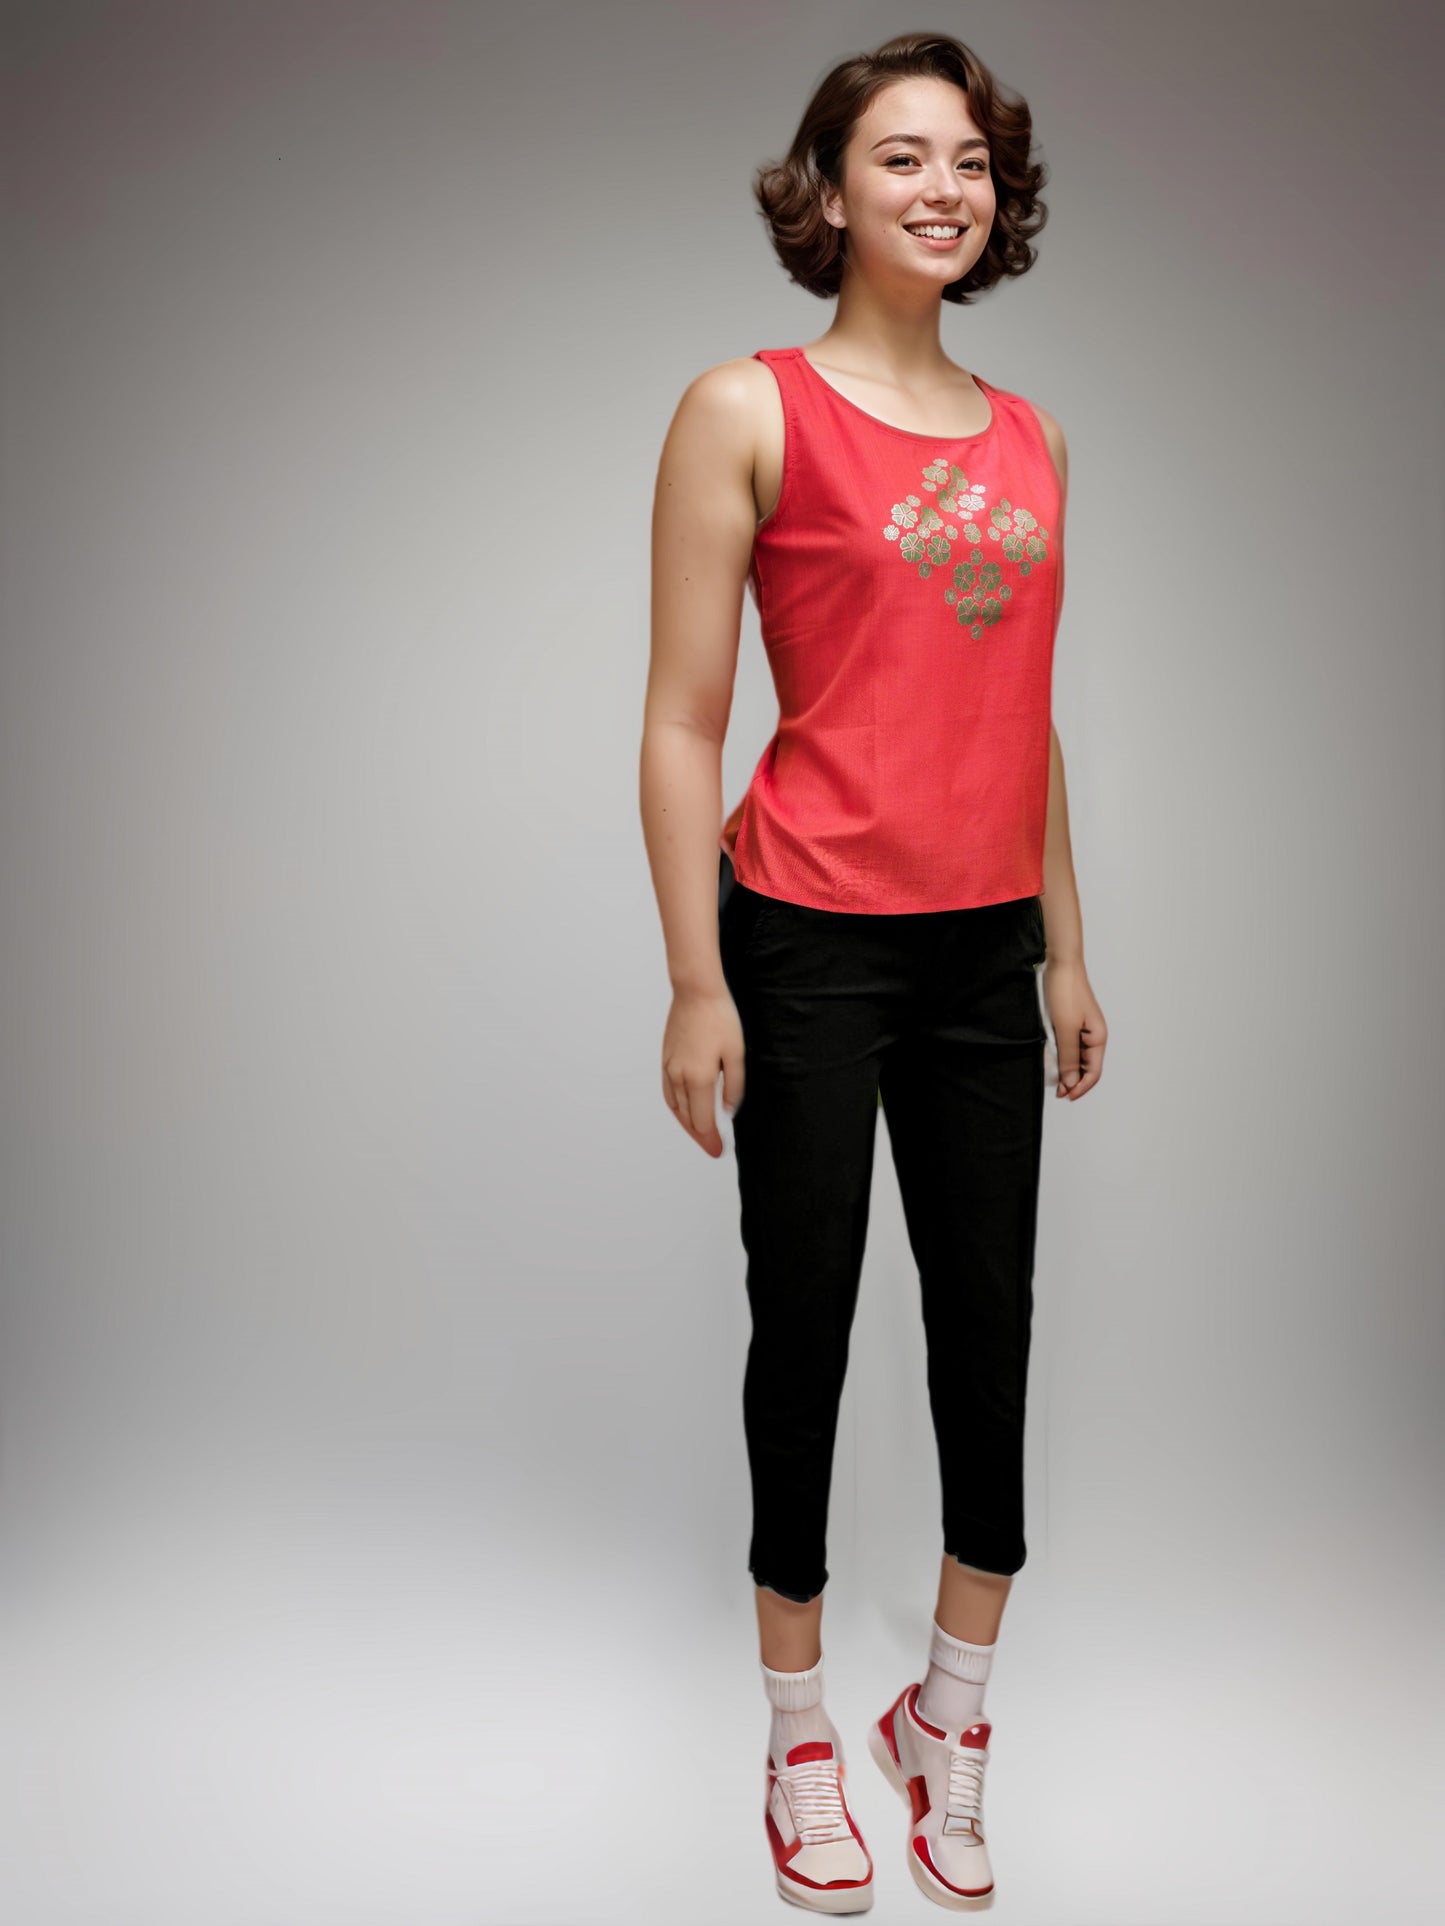 Aabandh's Sleevless Top - Flora ( Ruby Cotton )